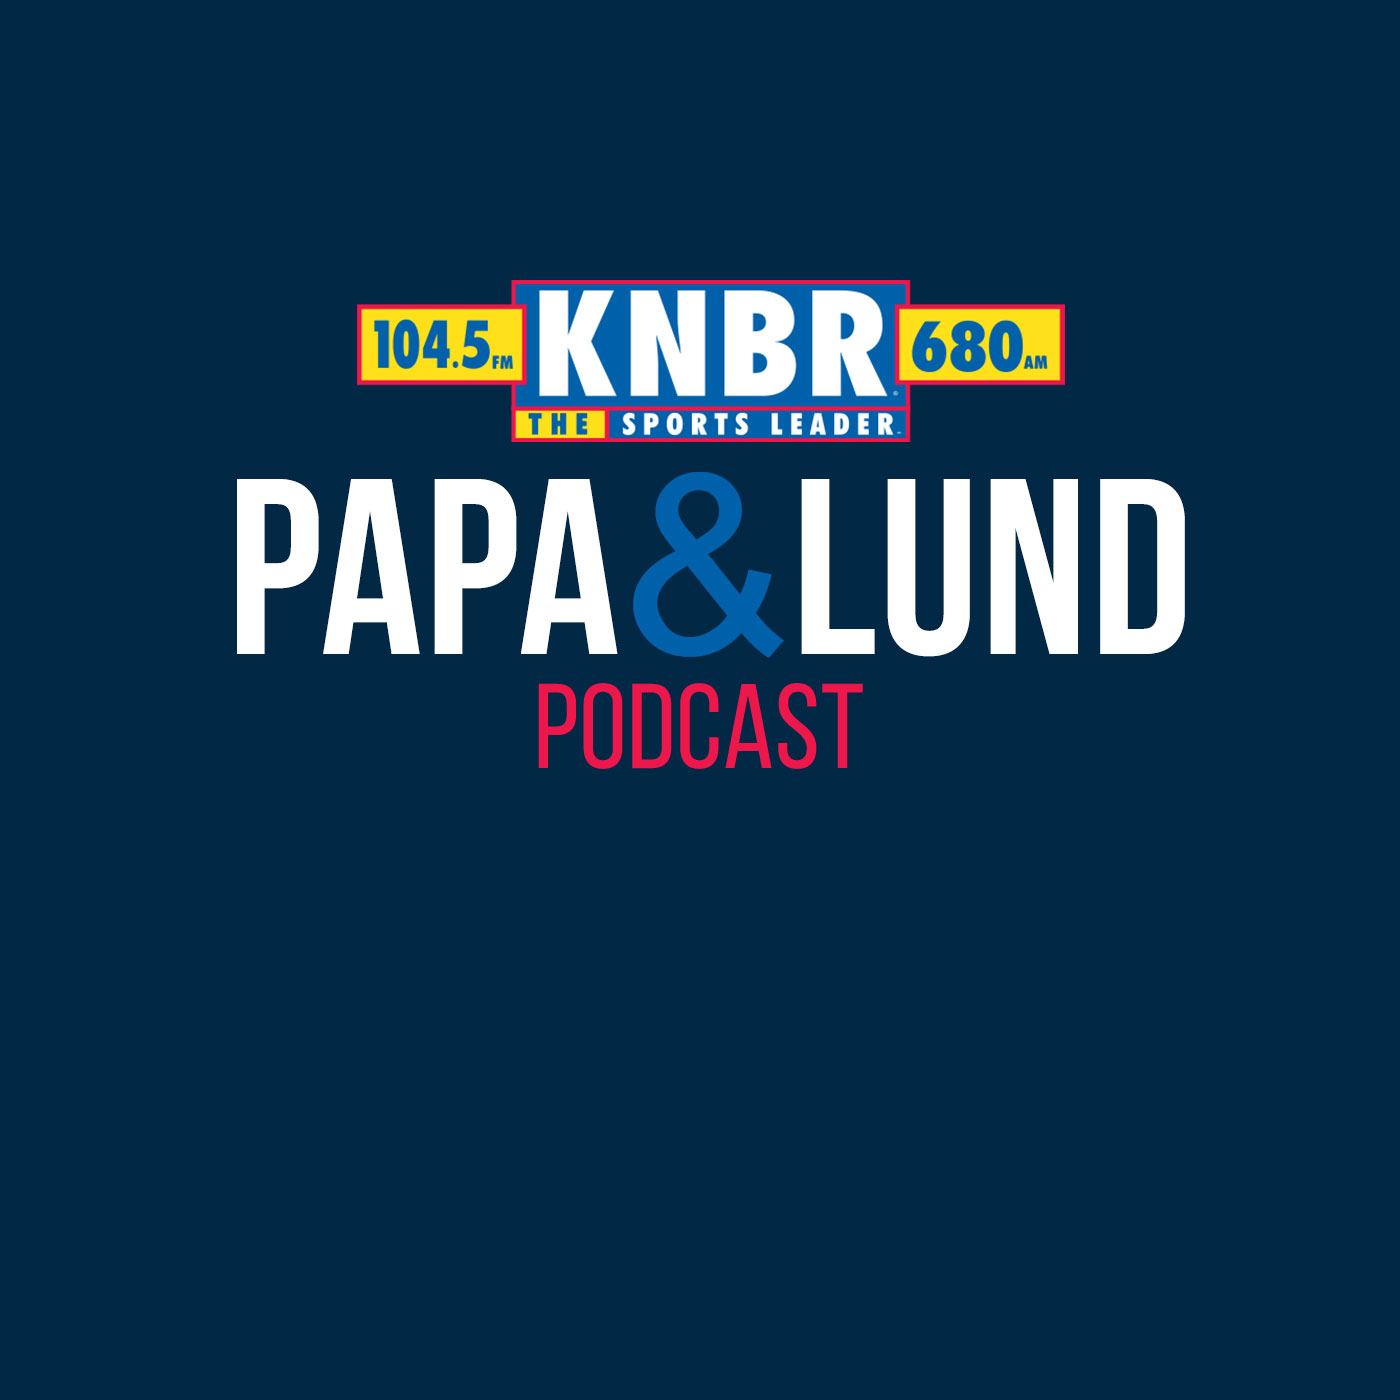 4-26 Matt Maiocco joins Papa & Lund to discuss the 49ers decision to draft Ricky Pearsall & what that could potentially mean for Brandon Aiyuk & Deebo Samuel moving forward